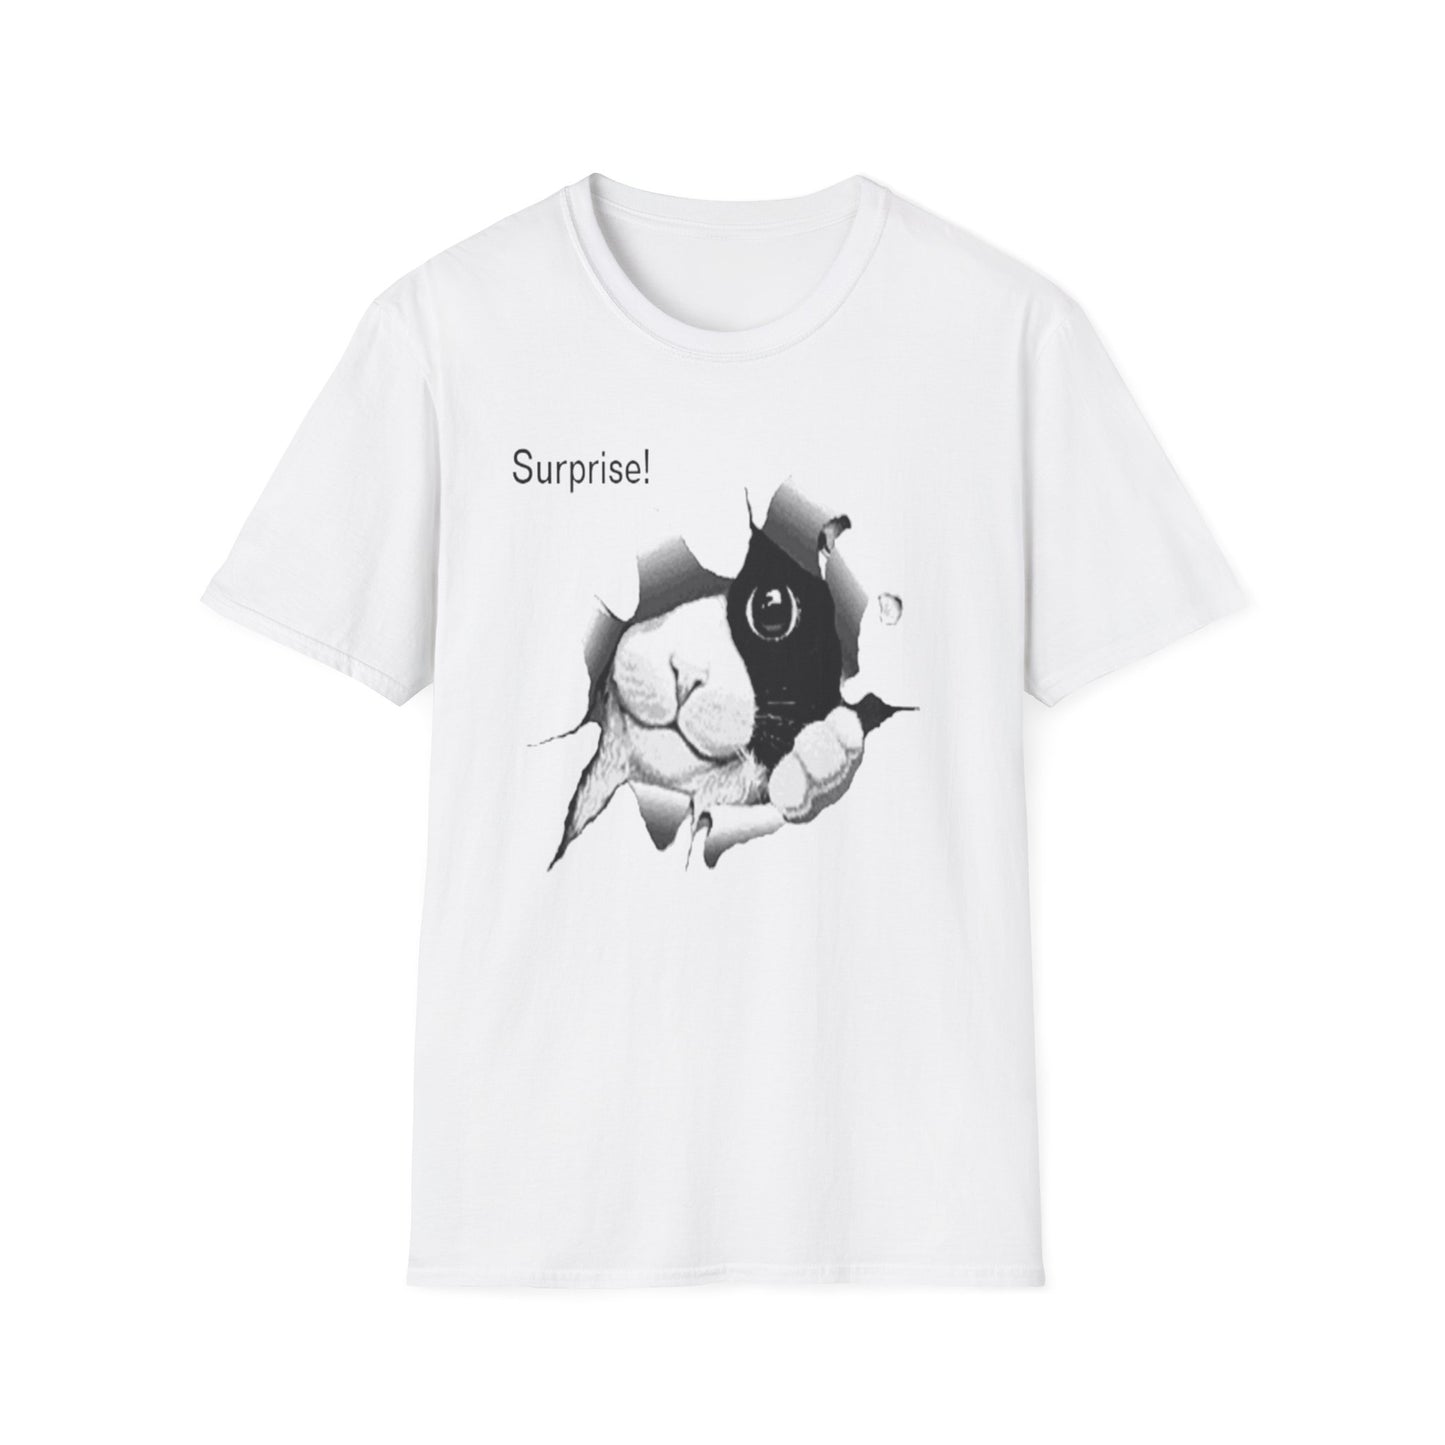 A white t-shirt with a design of a black and white cat that has ripped a hole in the shirt and is peeping through. Surprise! is written to the top left.